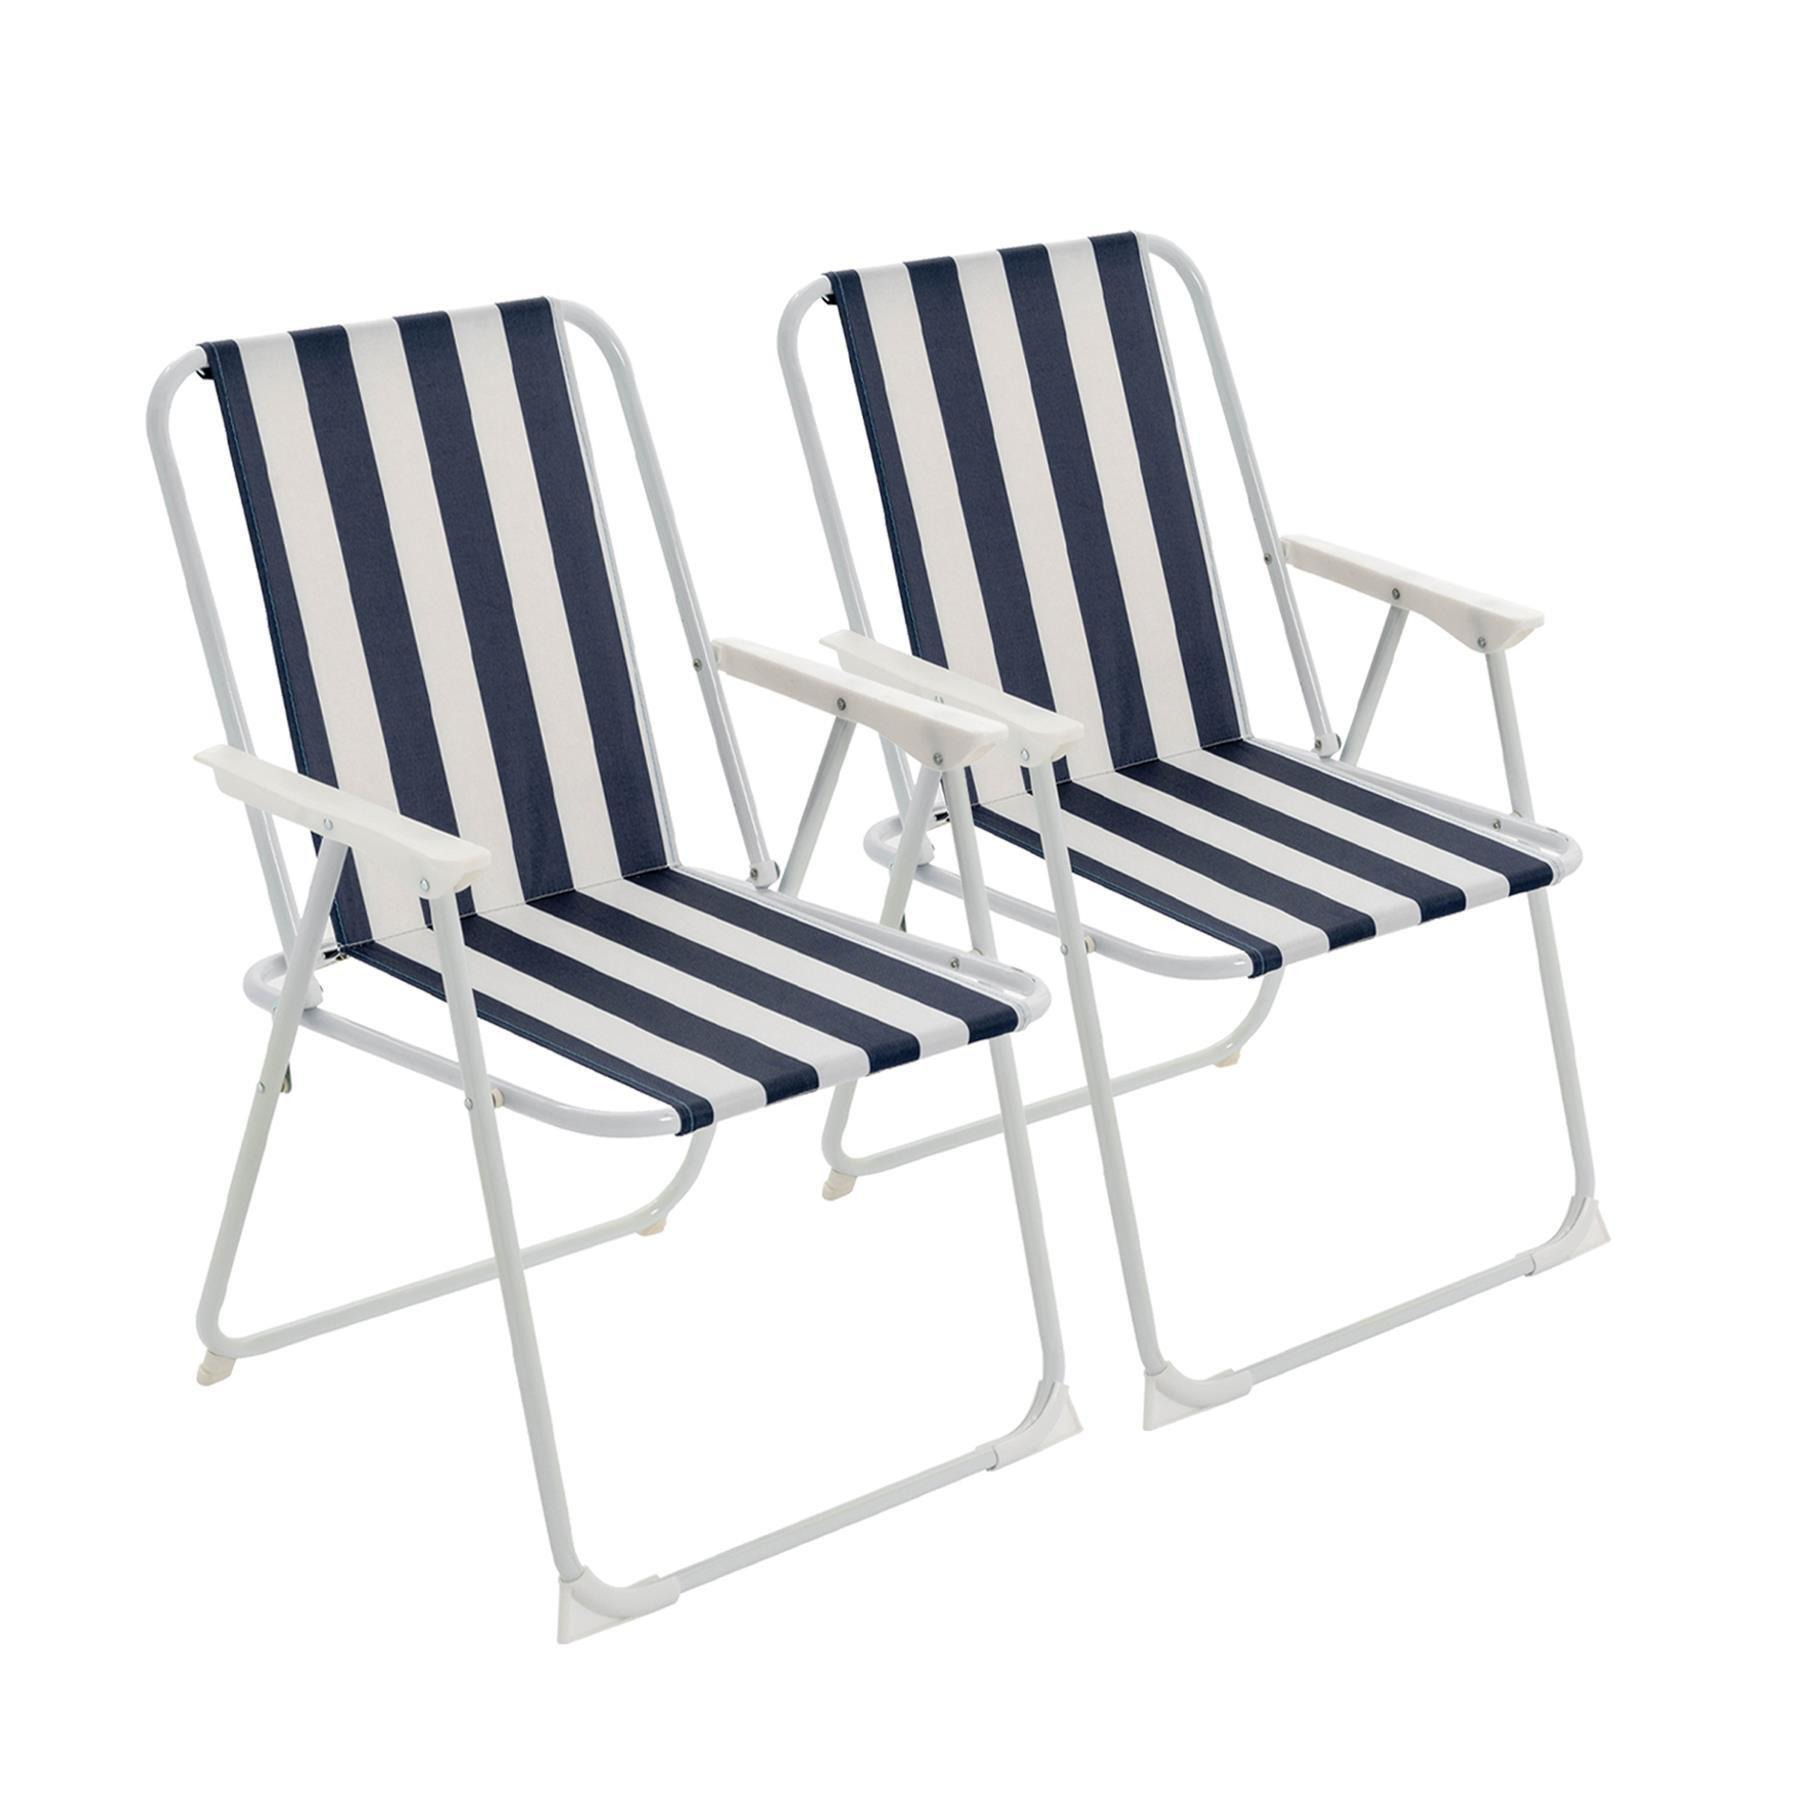 Folding Metal Beach Chairs Pack of 2 - image 1